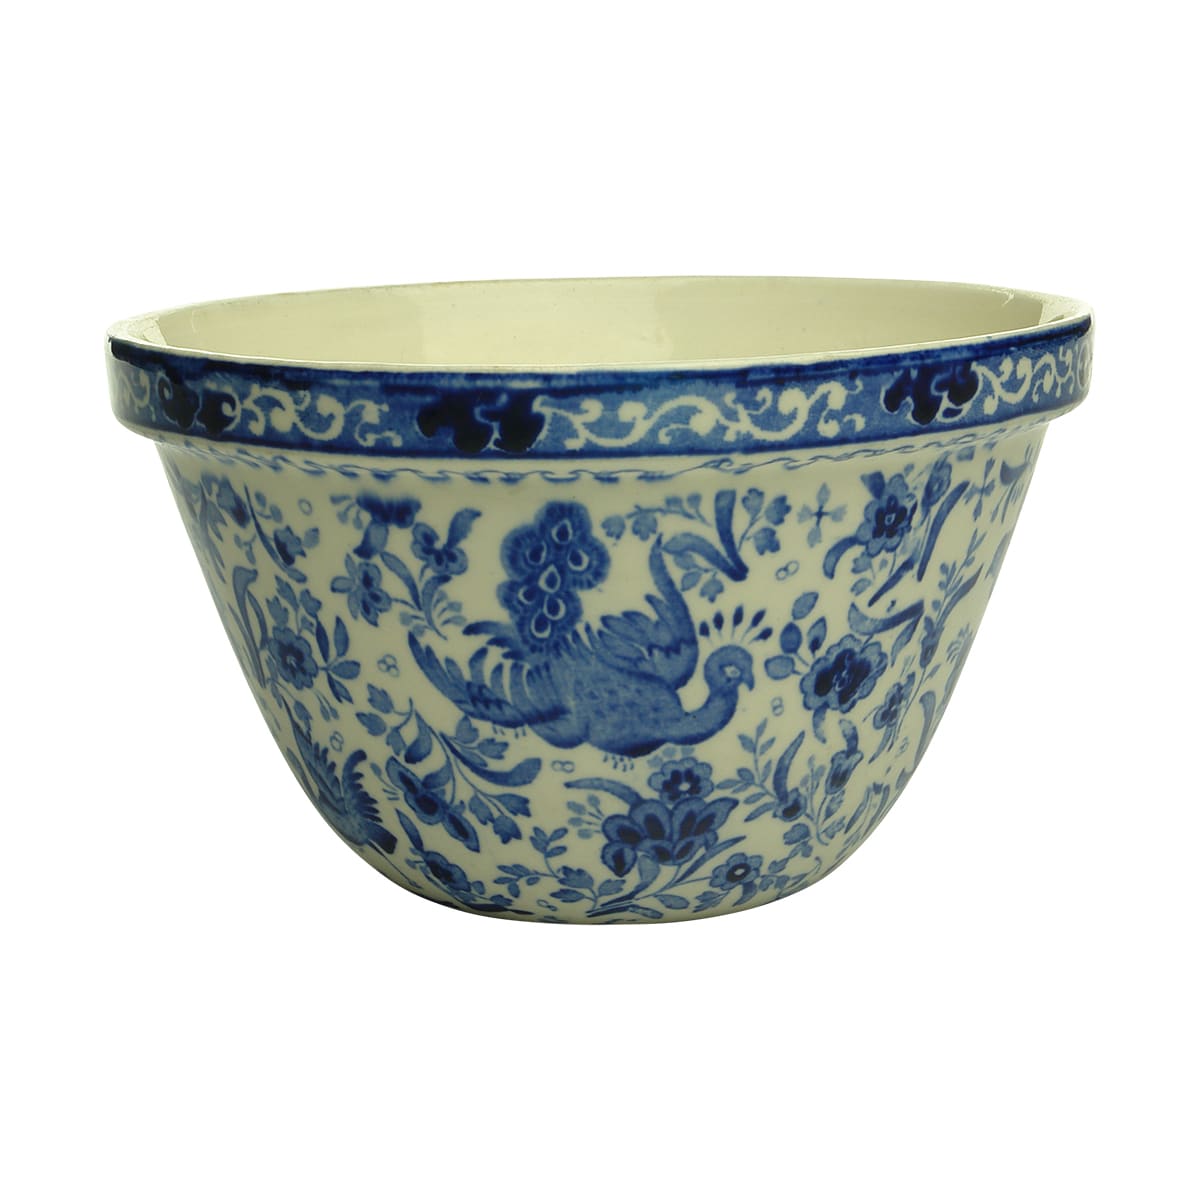 Mutual Store Melbourne Pudding Bowl. 160 mm.